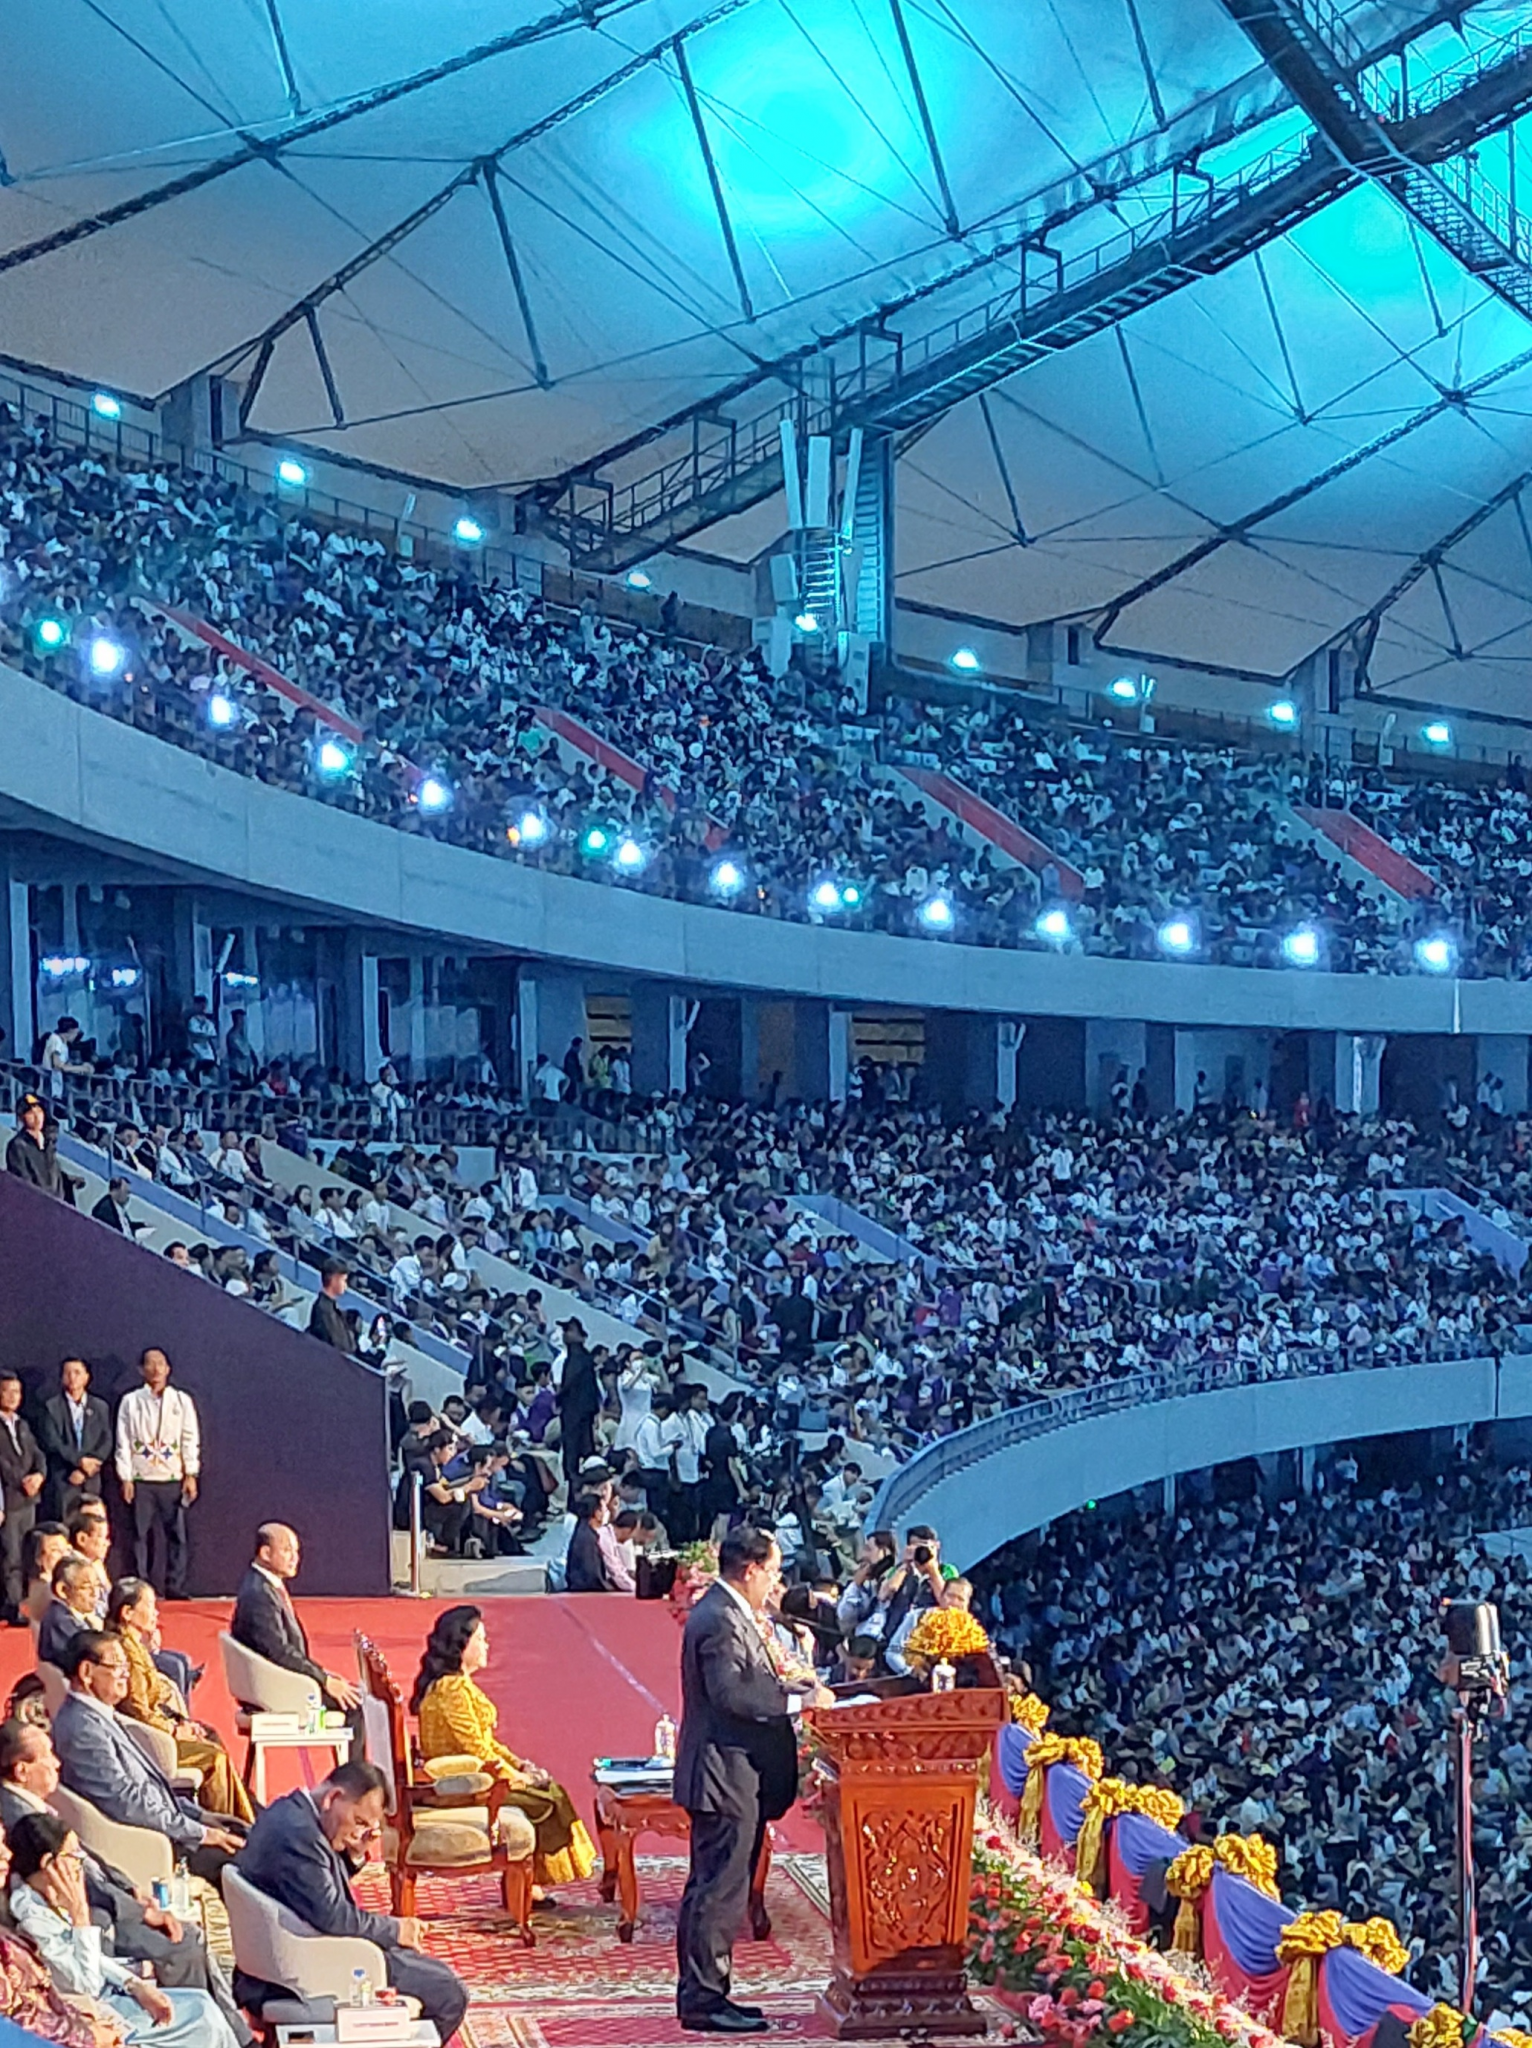 Cambodia's Prime Minister Prime Minister Hun Sen officially opened the ASEAN Para Games in front of a capacity 60,000 crowd at the Morodok Techo Stadium in  Phnom Penh ©APSF